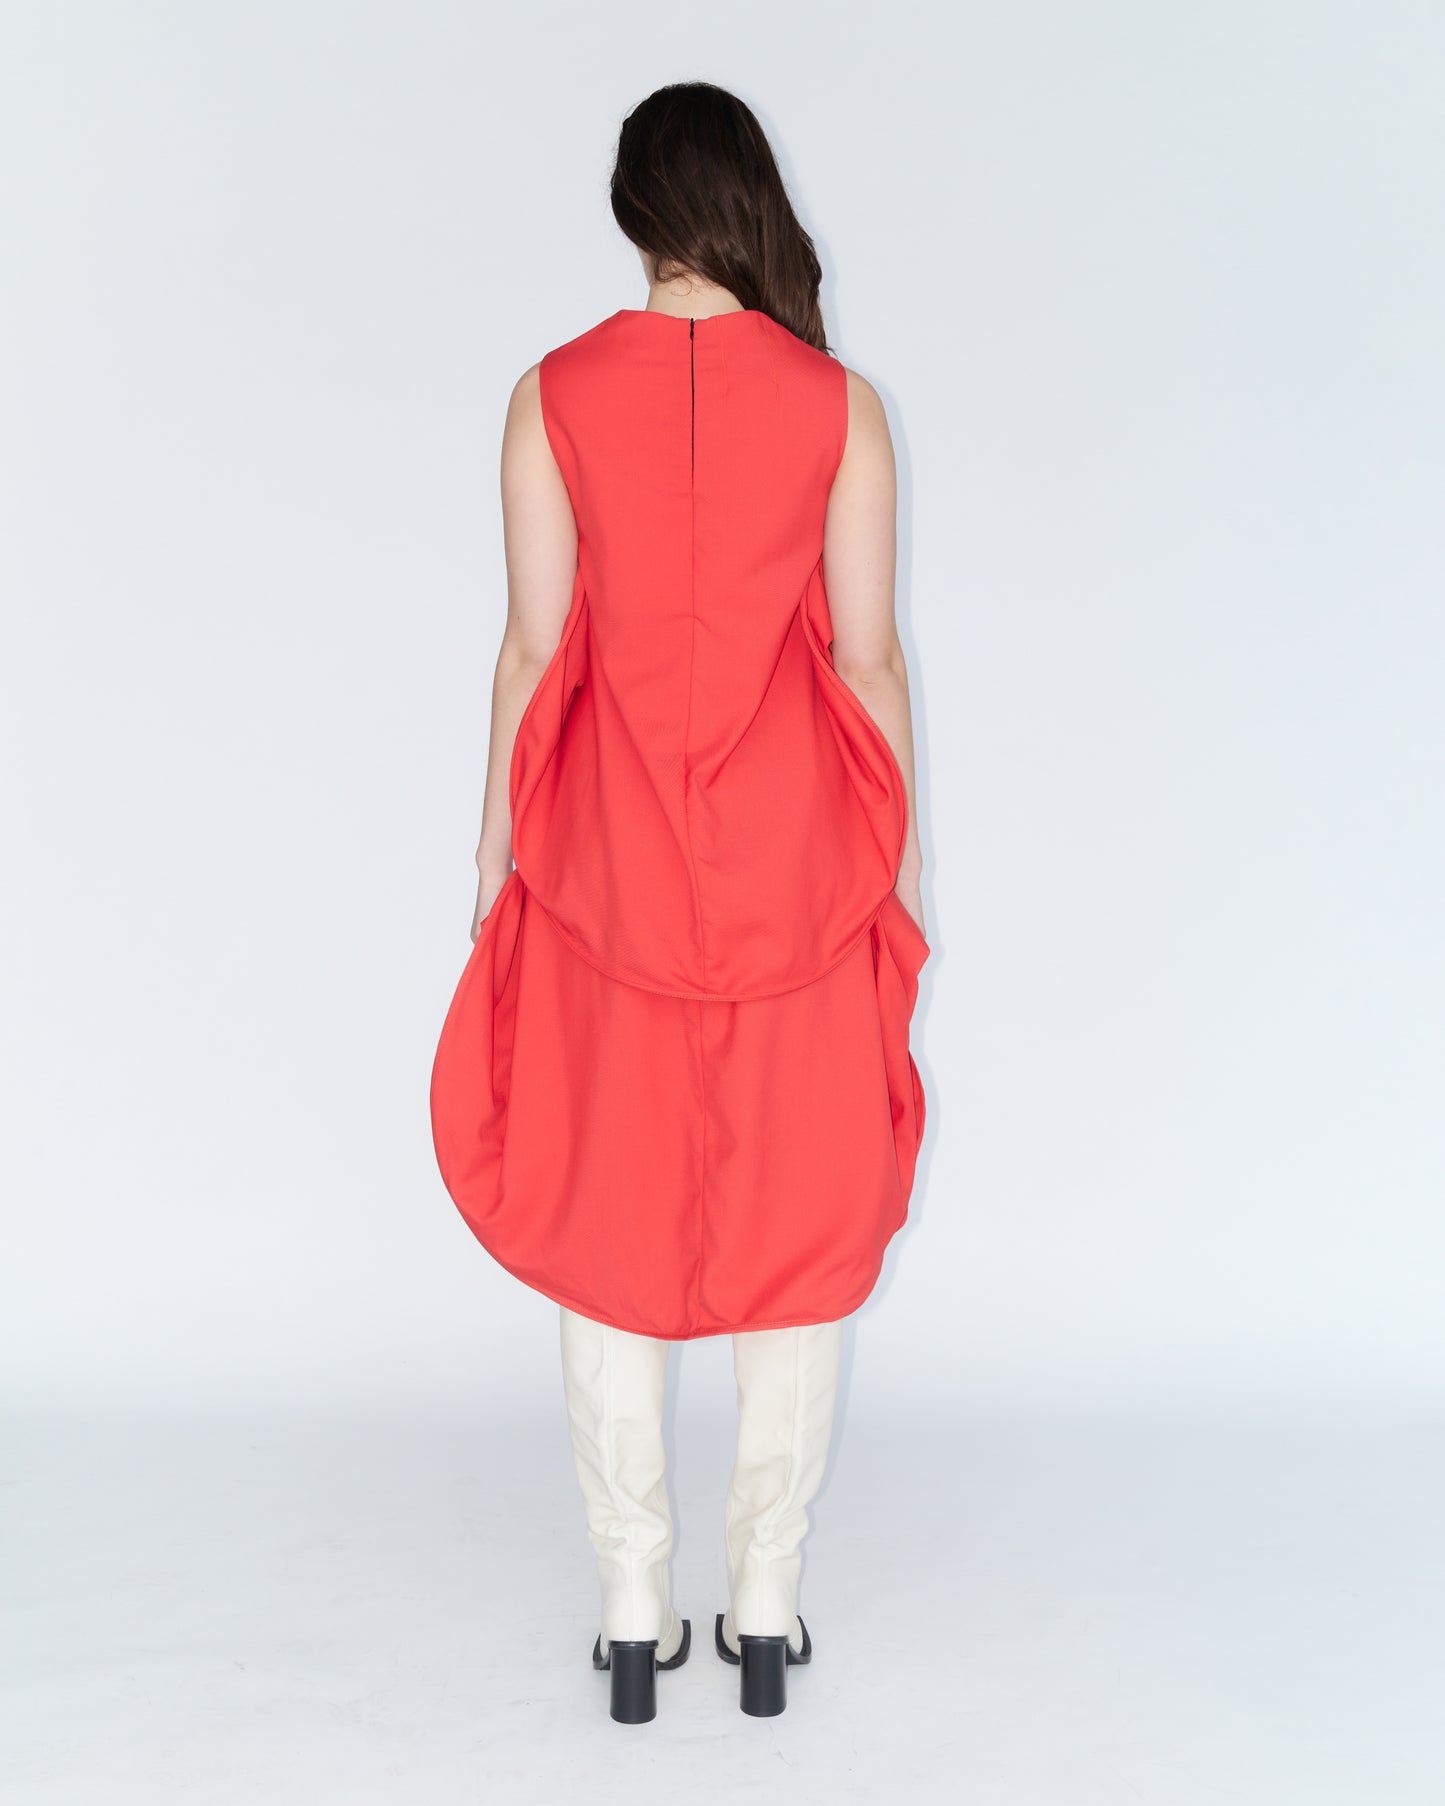 Rhubarb and Skullcap Coral Red Two piece Runway